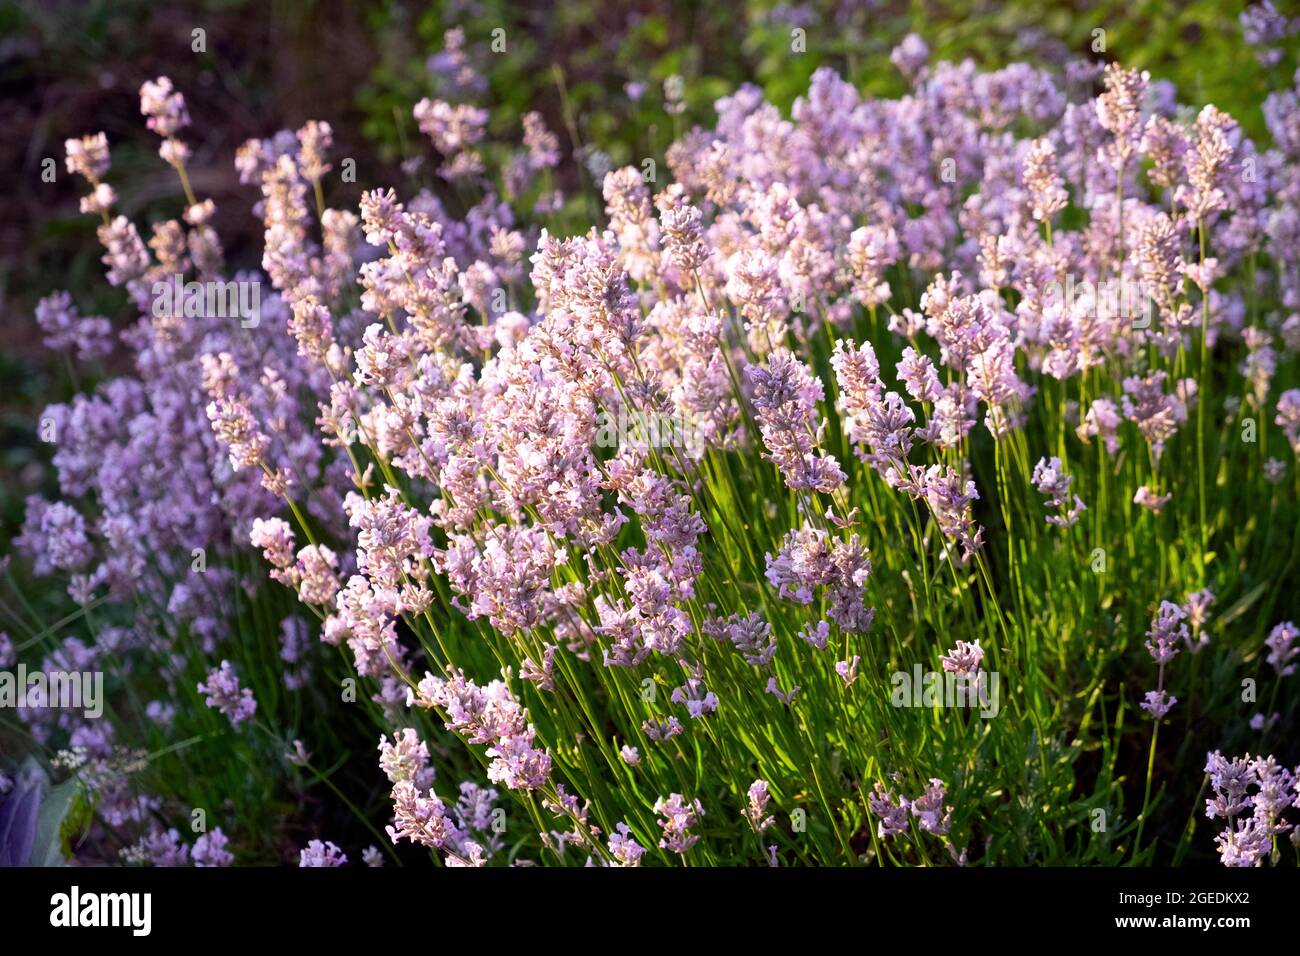 Sunlight pouring through purple mauve English Lavender flowers (Lavandula Hidcote) in bloom in a July garden in Wales UK  KATHY DEWITT Stock Photo